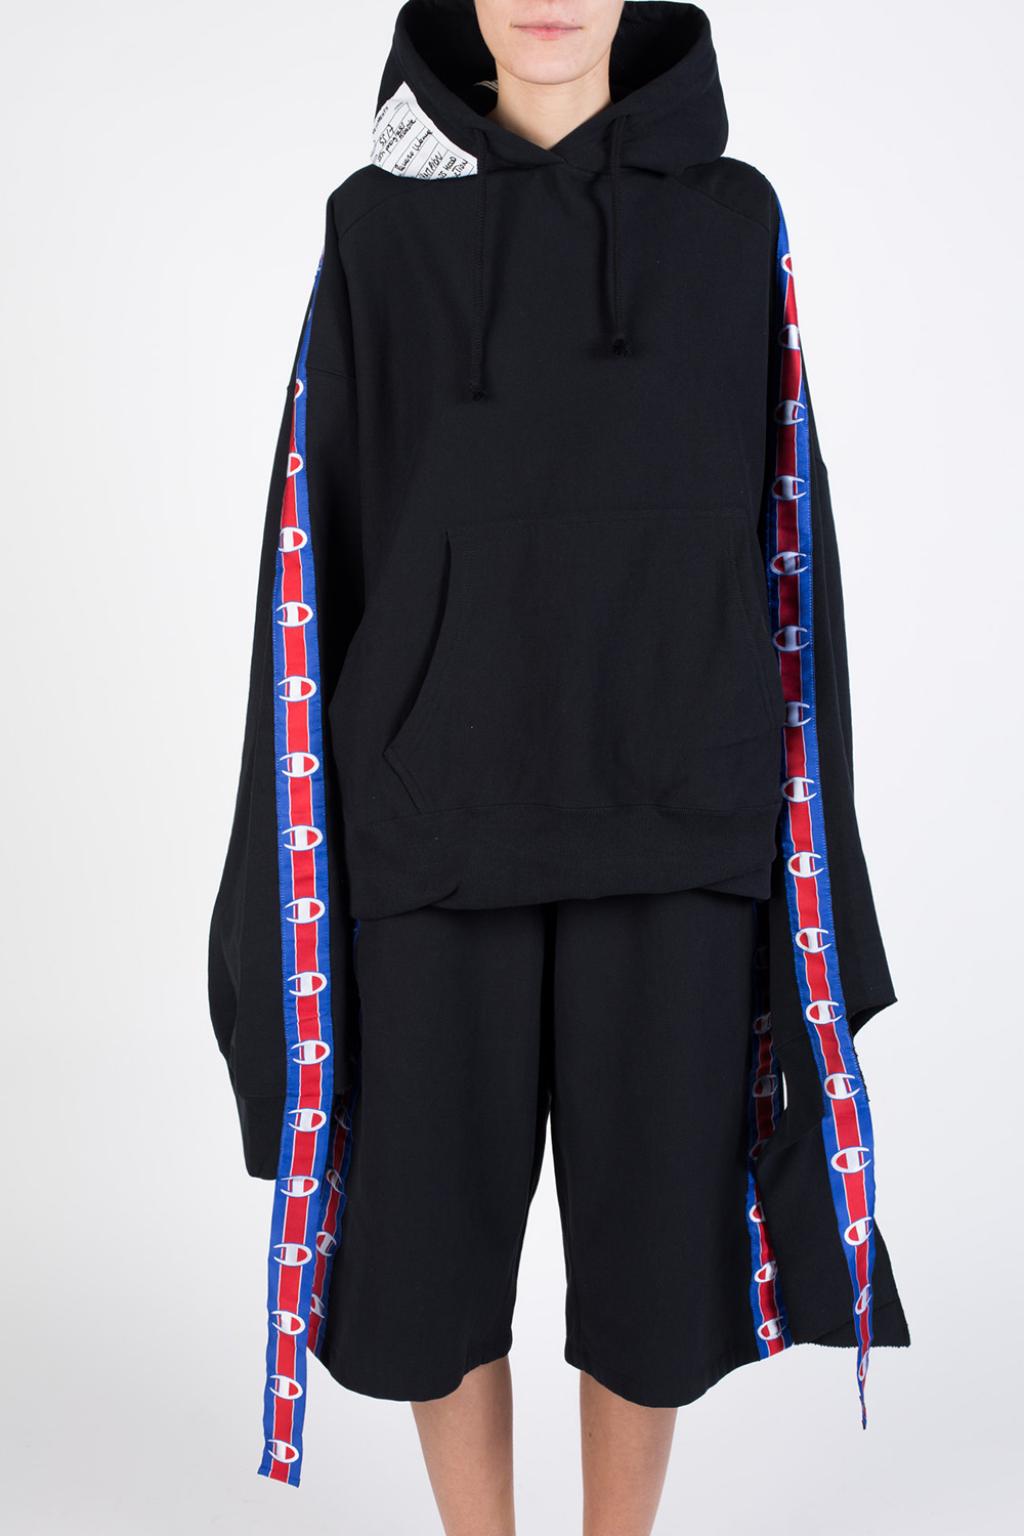 At accelerere Bred vifte Forstyrret vetements x champion sweatshirt Off 61% - wuuproduction.com